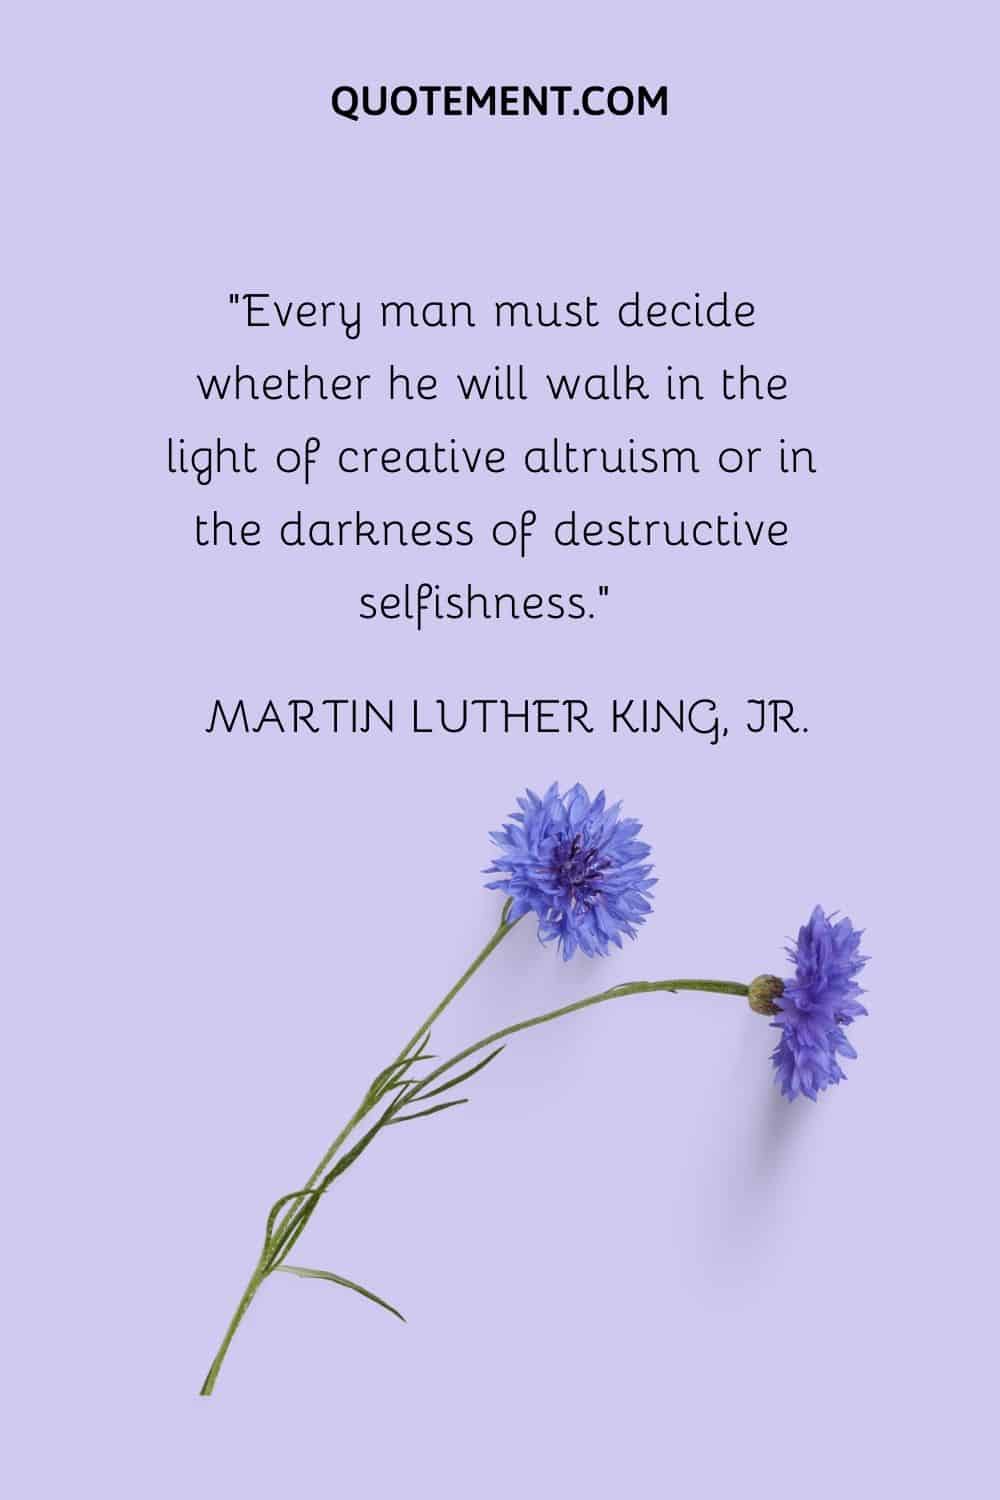 Every man must decide whether he will walk in the light of creative altruism